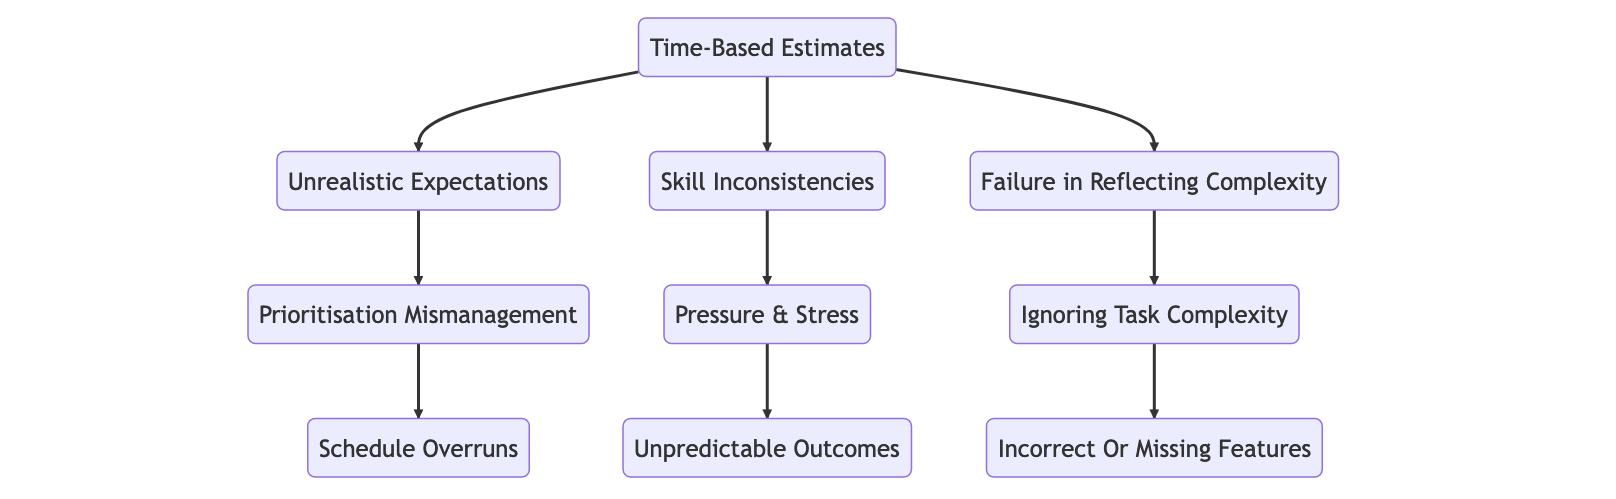 /2023/04/escaping-the-time-trap-why-estimating-effort-not-time-leads-to-greater-success/time-based-estimates.png